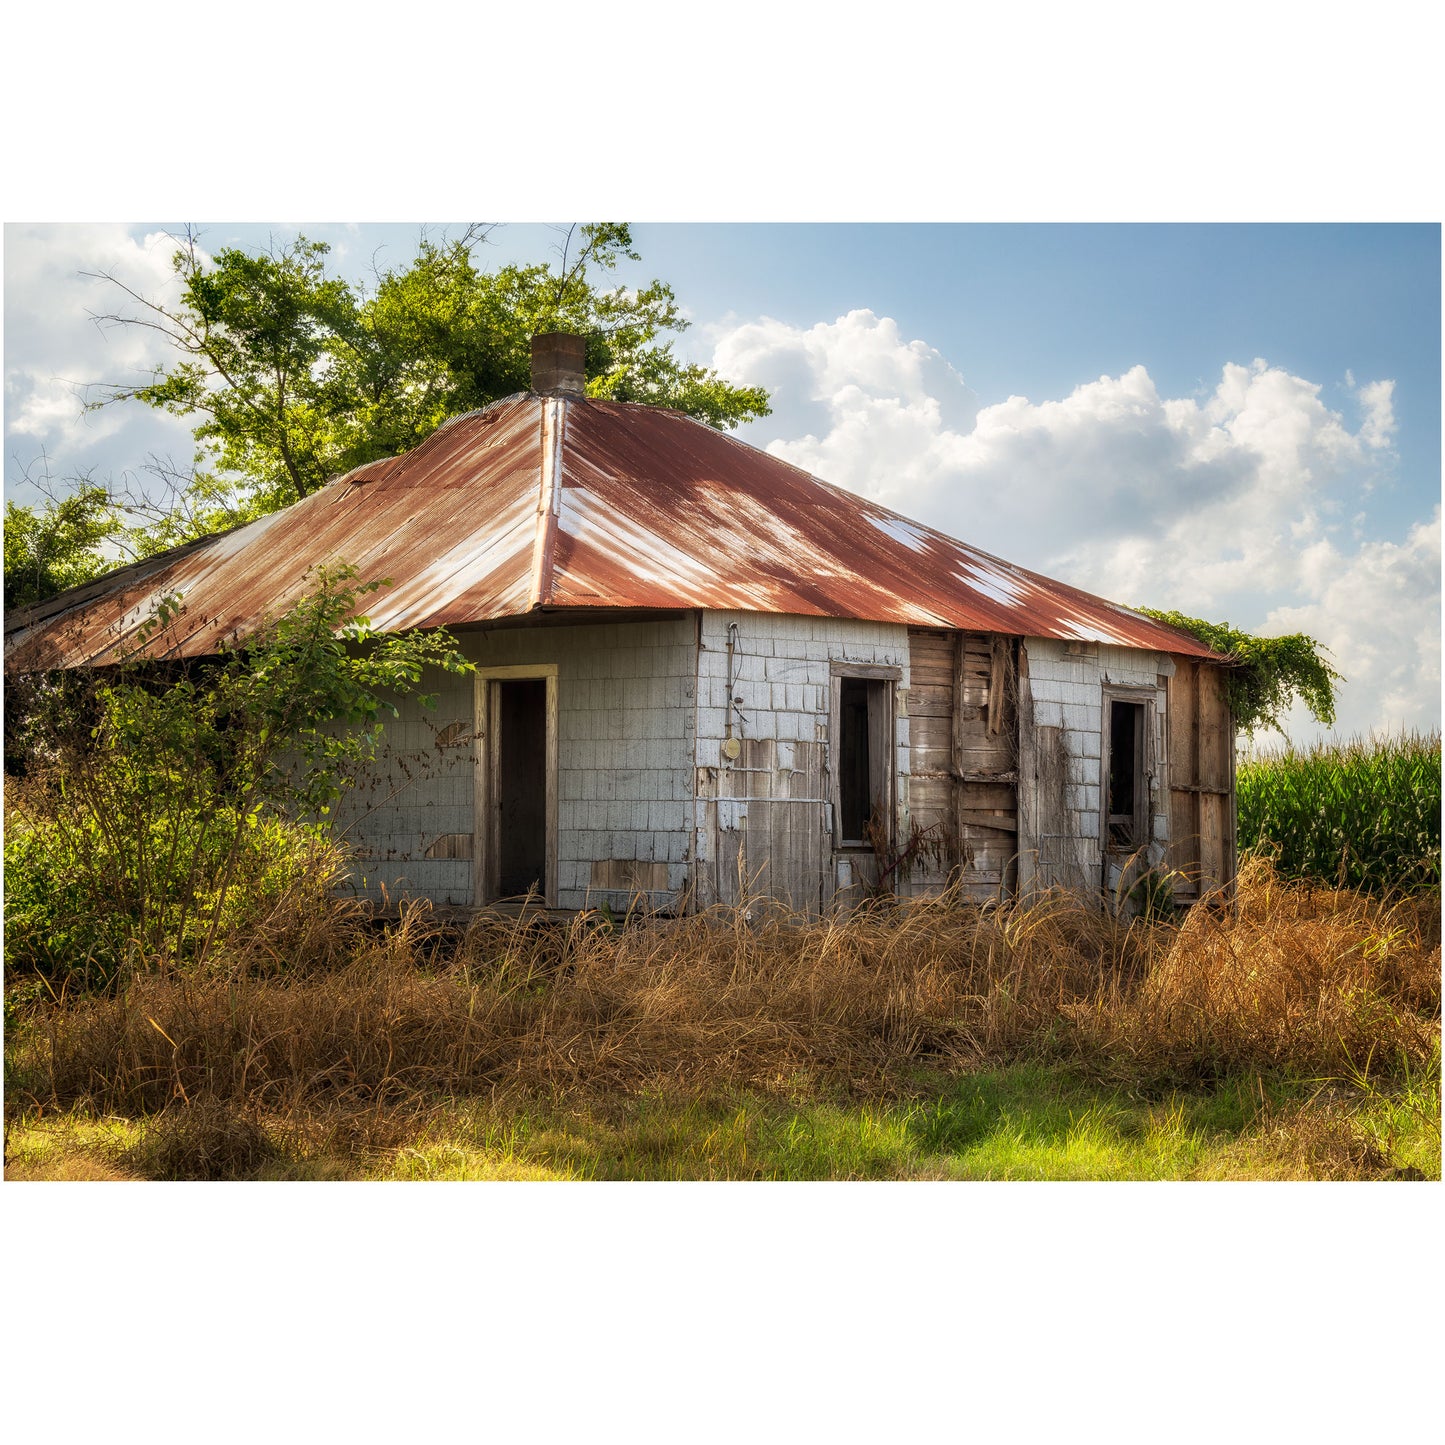 Color photography print showing a sharecroppers cottage in the Mississippi Delta, with a focus on its distinctive architectural features.